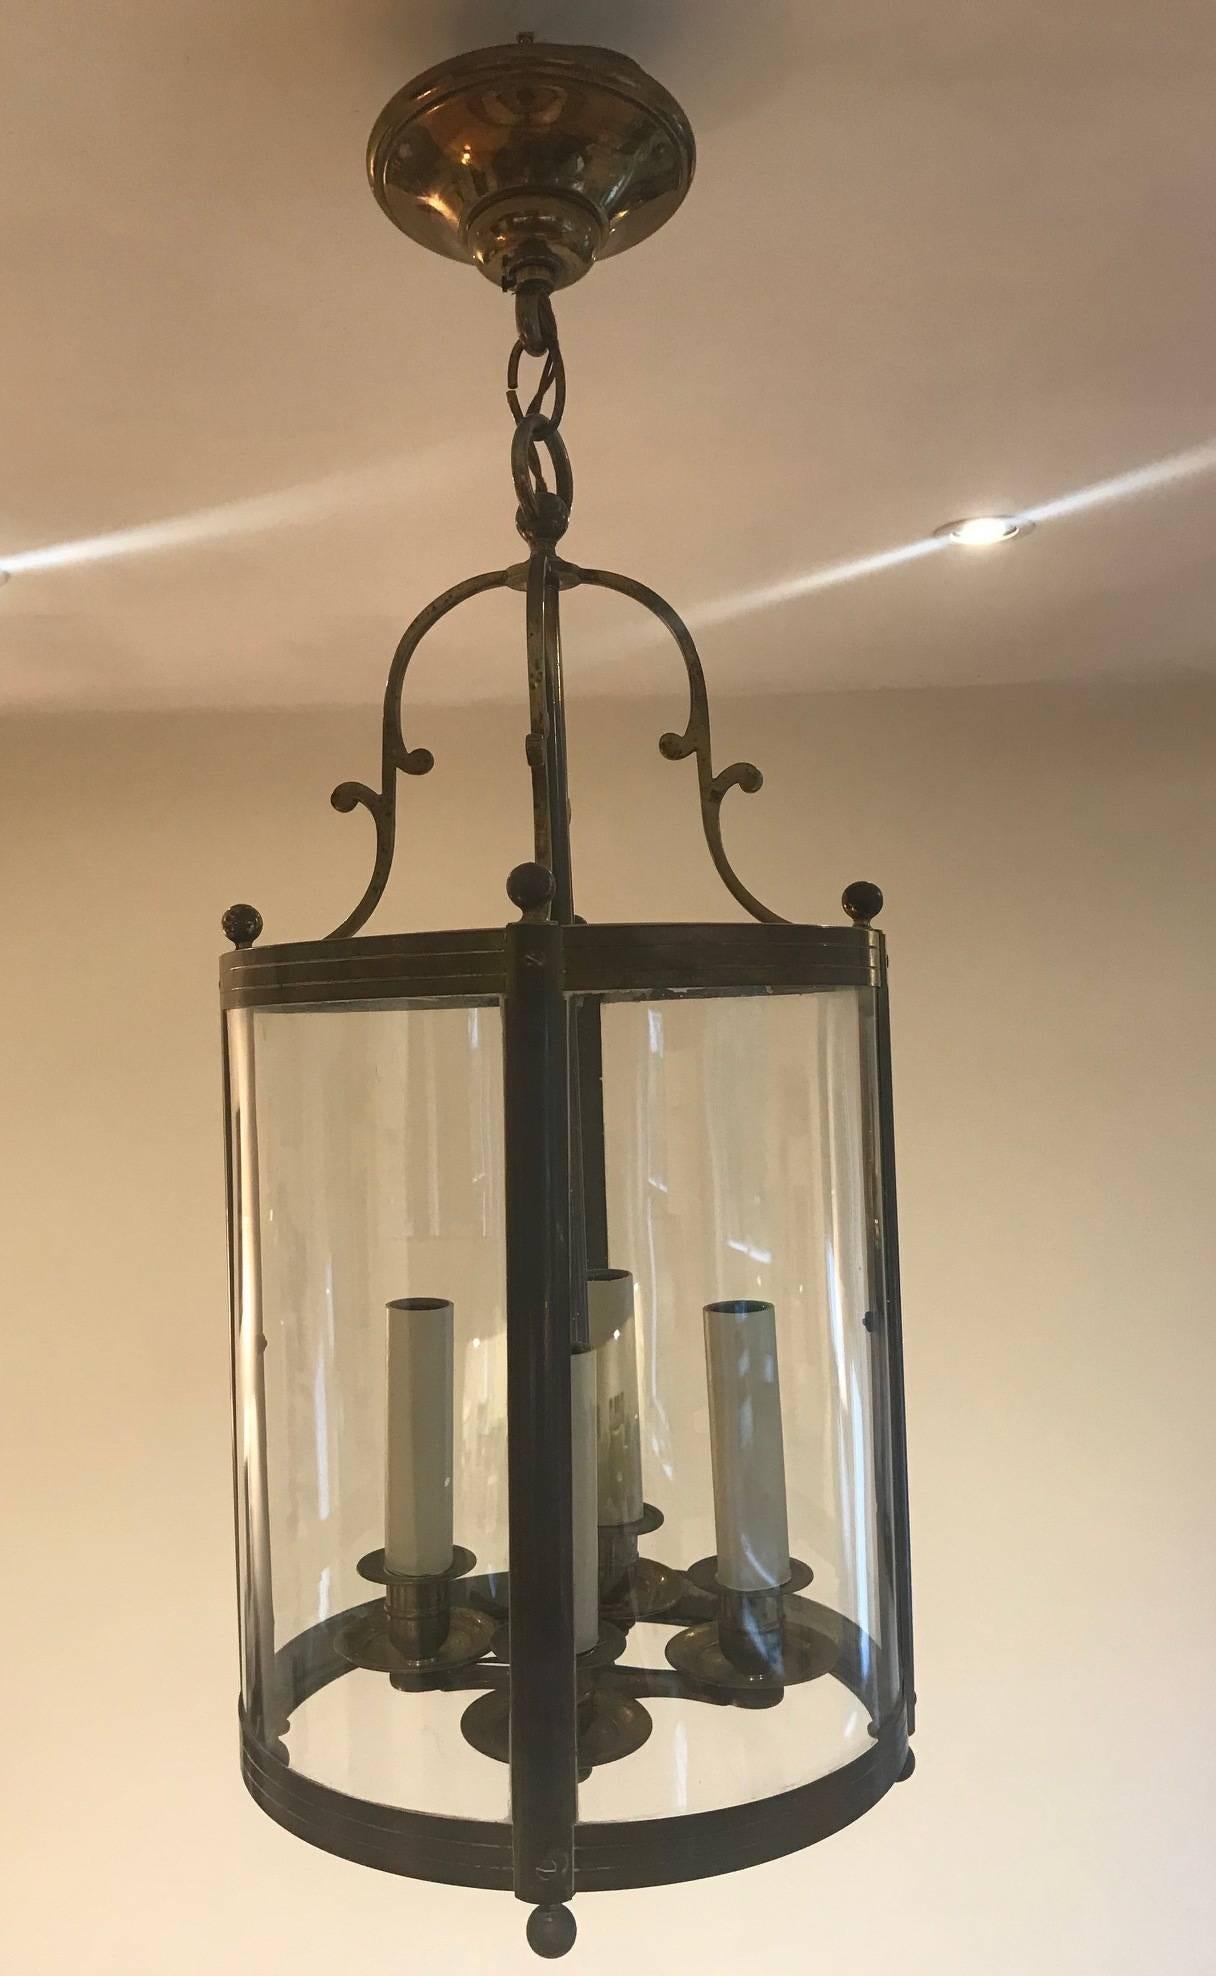 A very good quality 1940s bronze and glass hall lantern with integrated central four candle bulb holder.